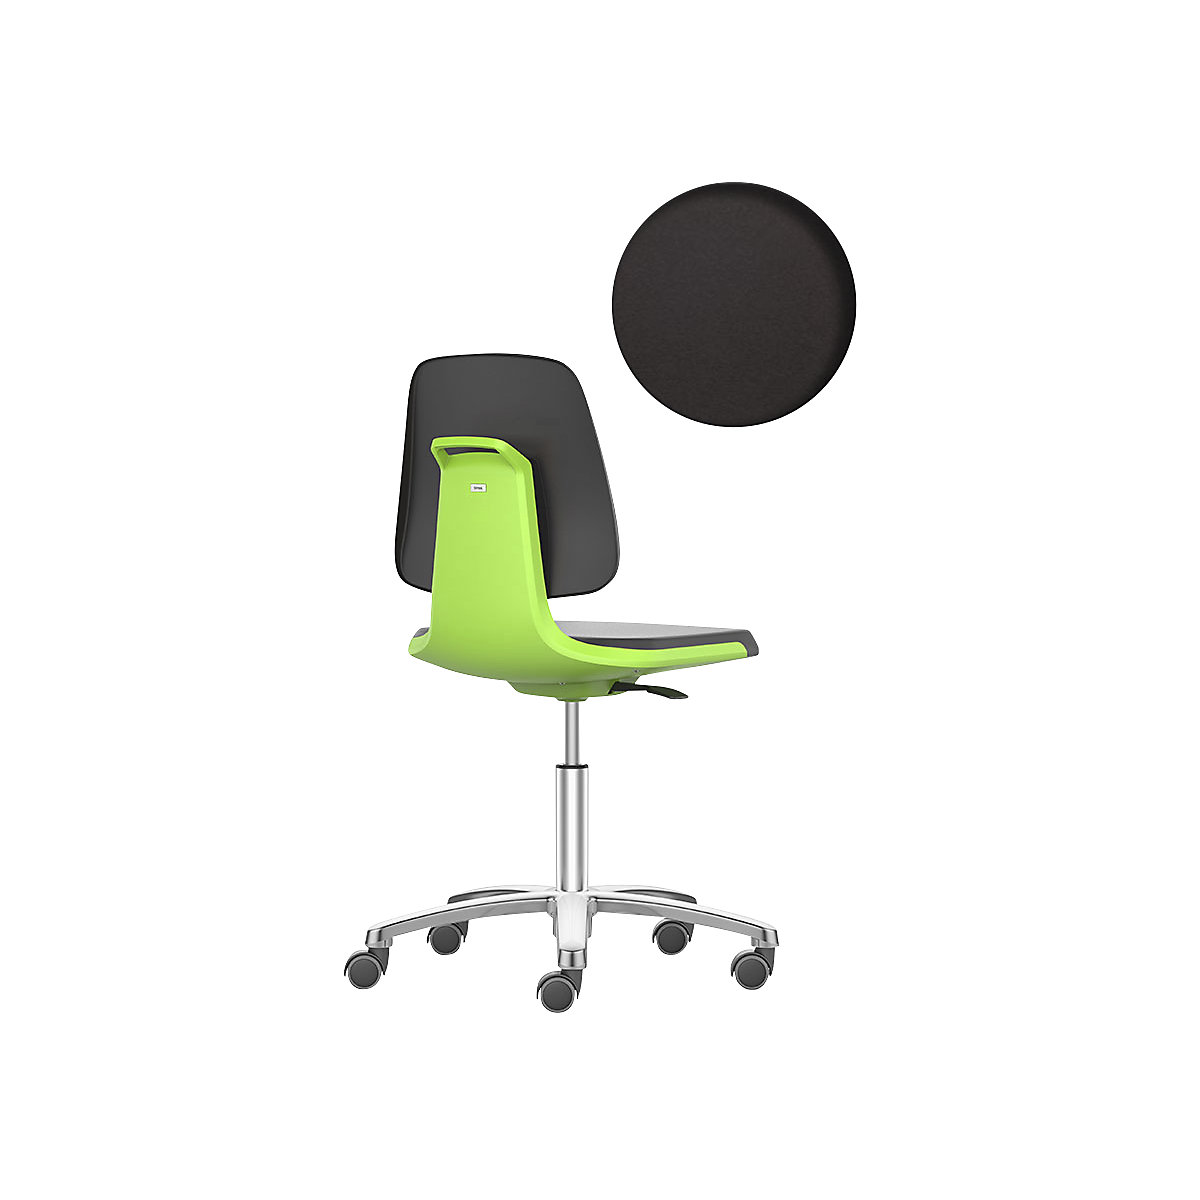 LABSIT industrial swivel chair – bimos, five-star base with castors, vinyl upholstered seat, green-24